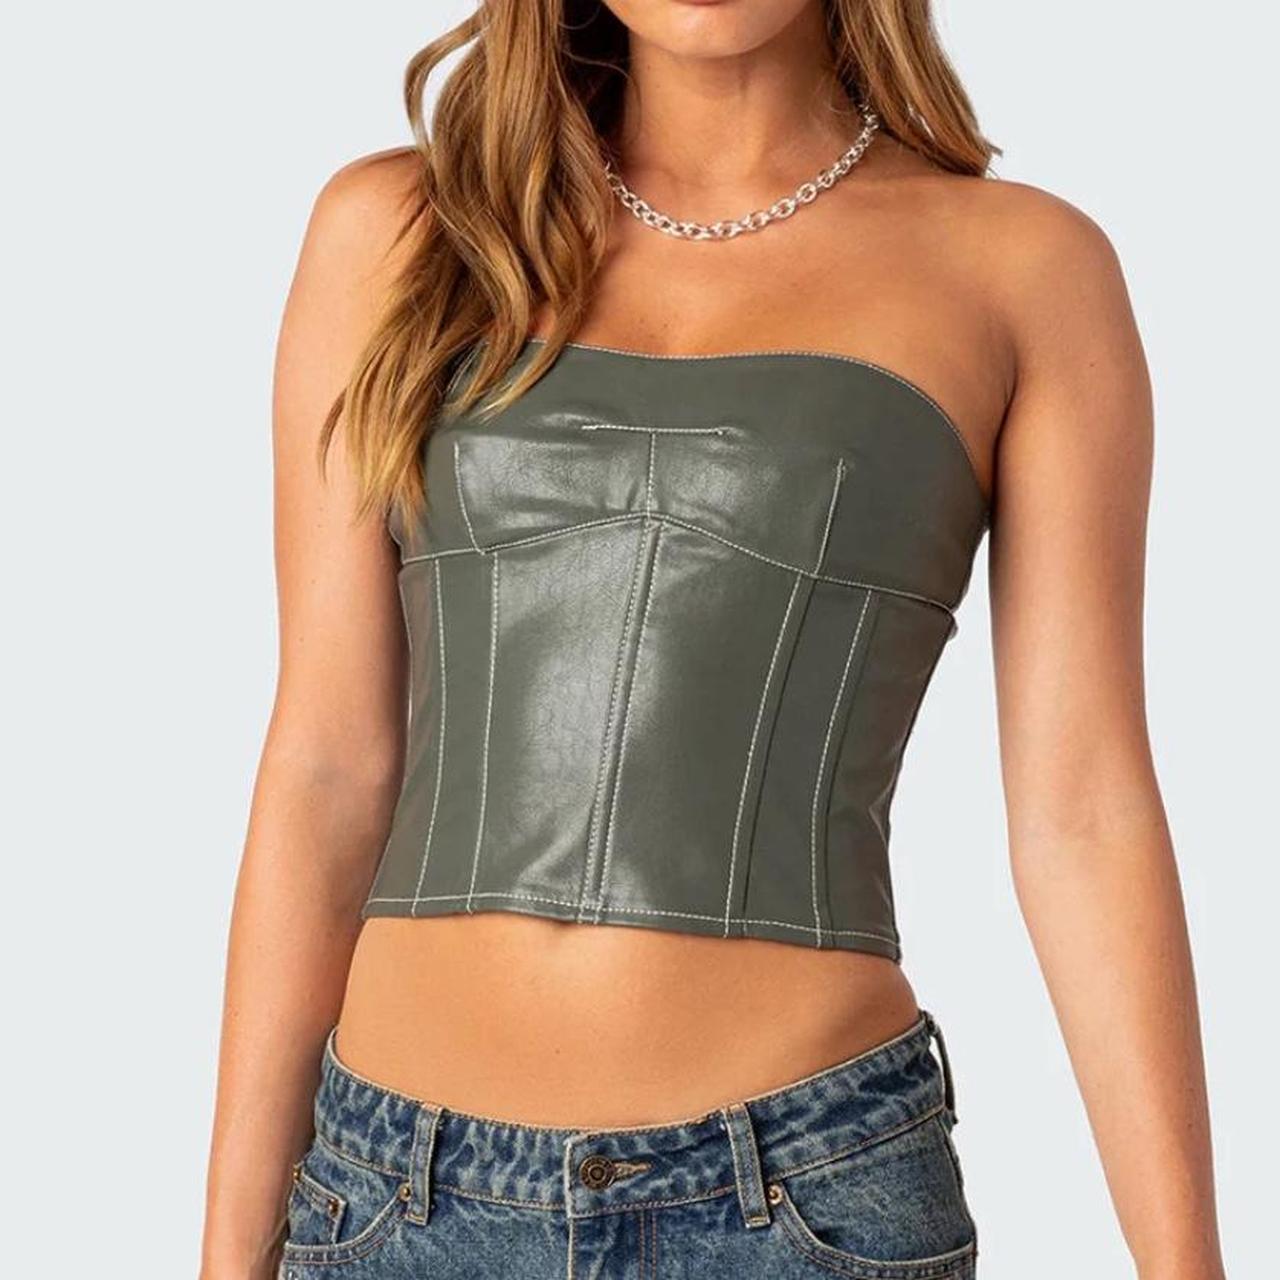 EDIKTED Moss Faux Leather Lace Up Womens Corset Top